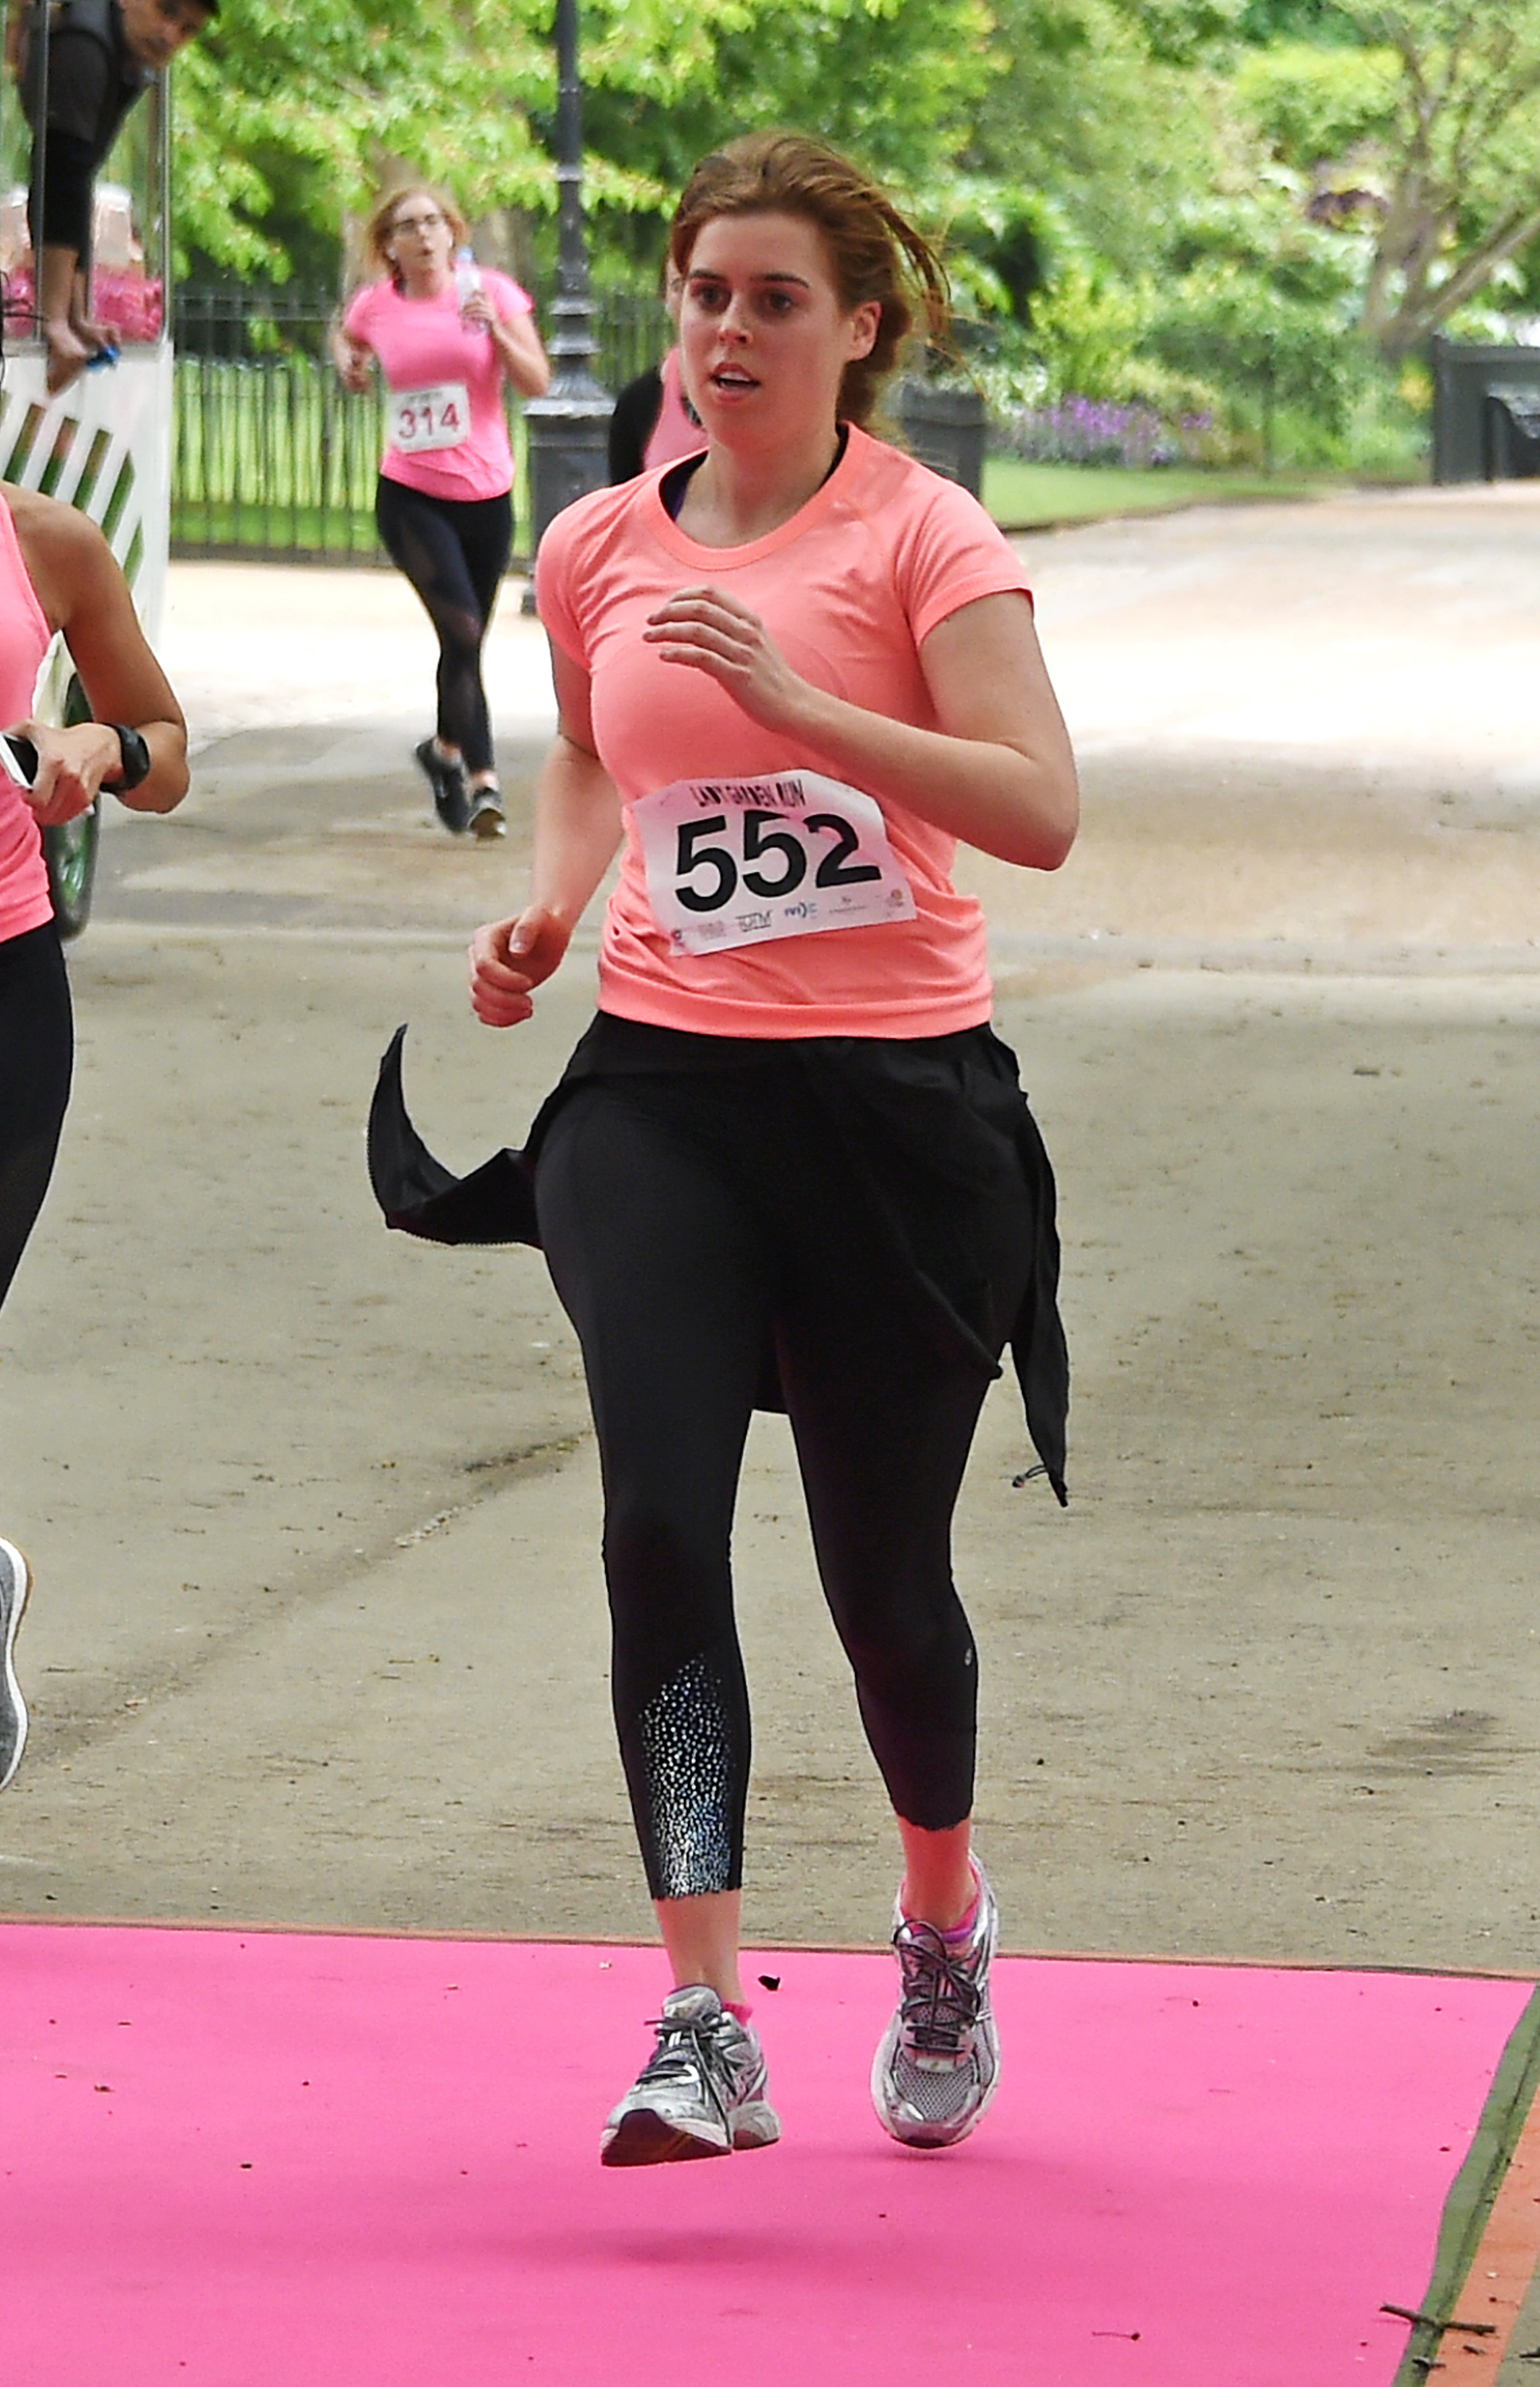 Princess Beatrice participating in the Lady Garden 5K & 10K Run in London, England on May 13, 2017 | Source: Getty Images